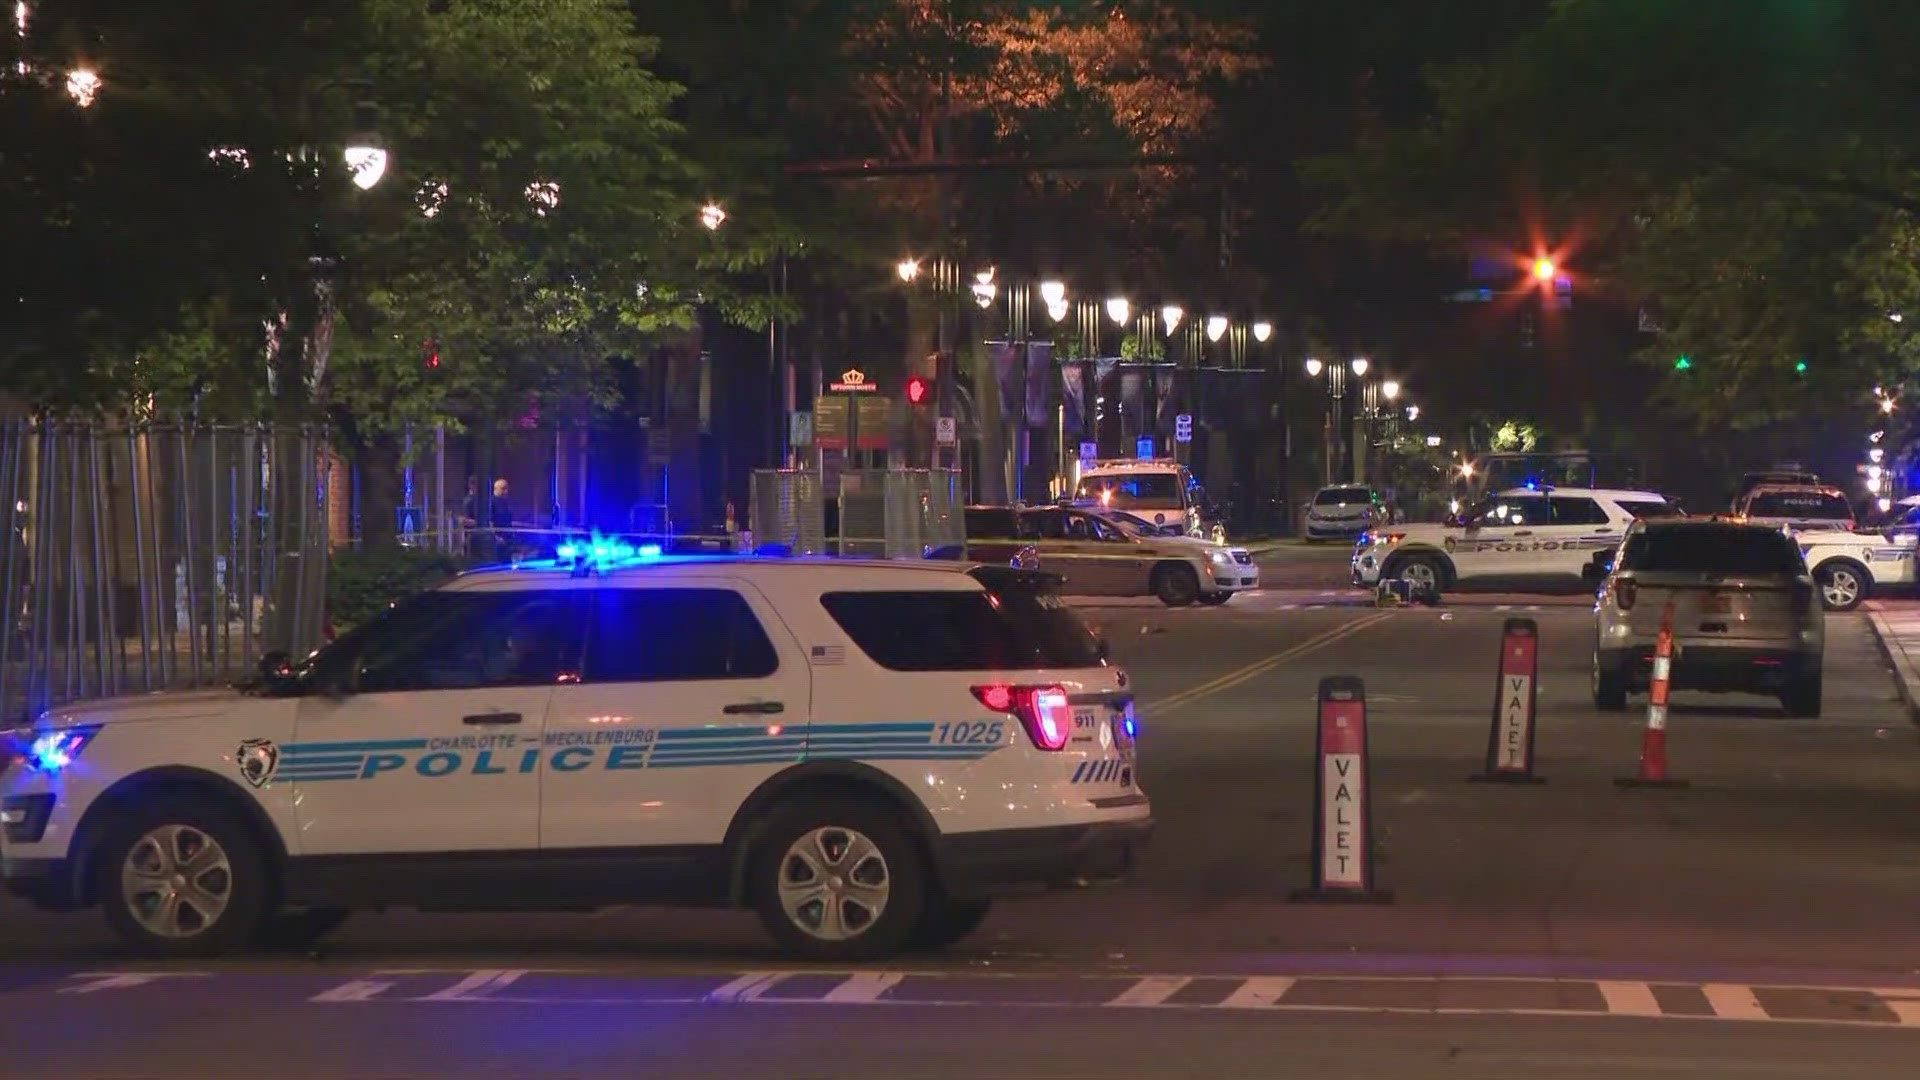 Four people were hurt in a shooting in Uptown Charlotte early Monday morning, police said.